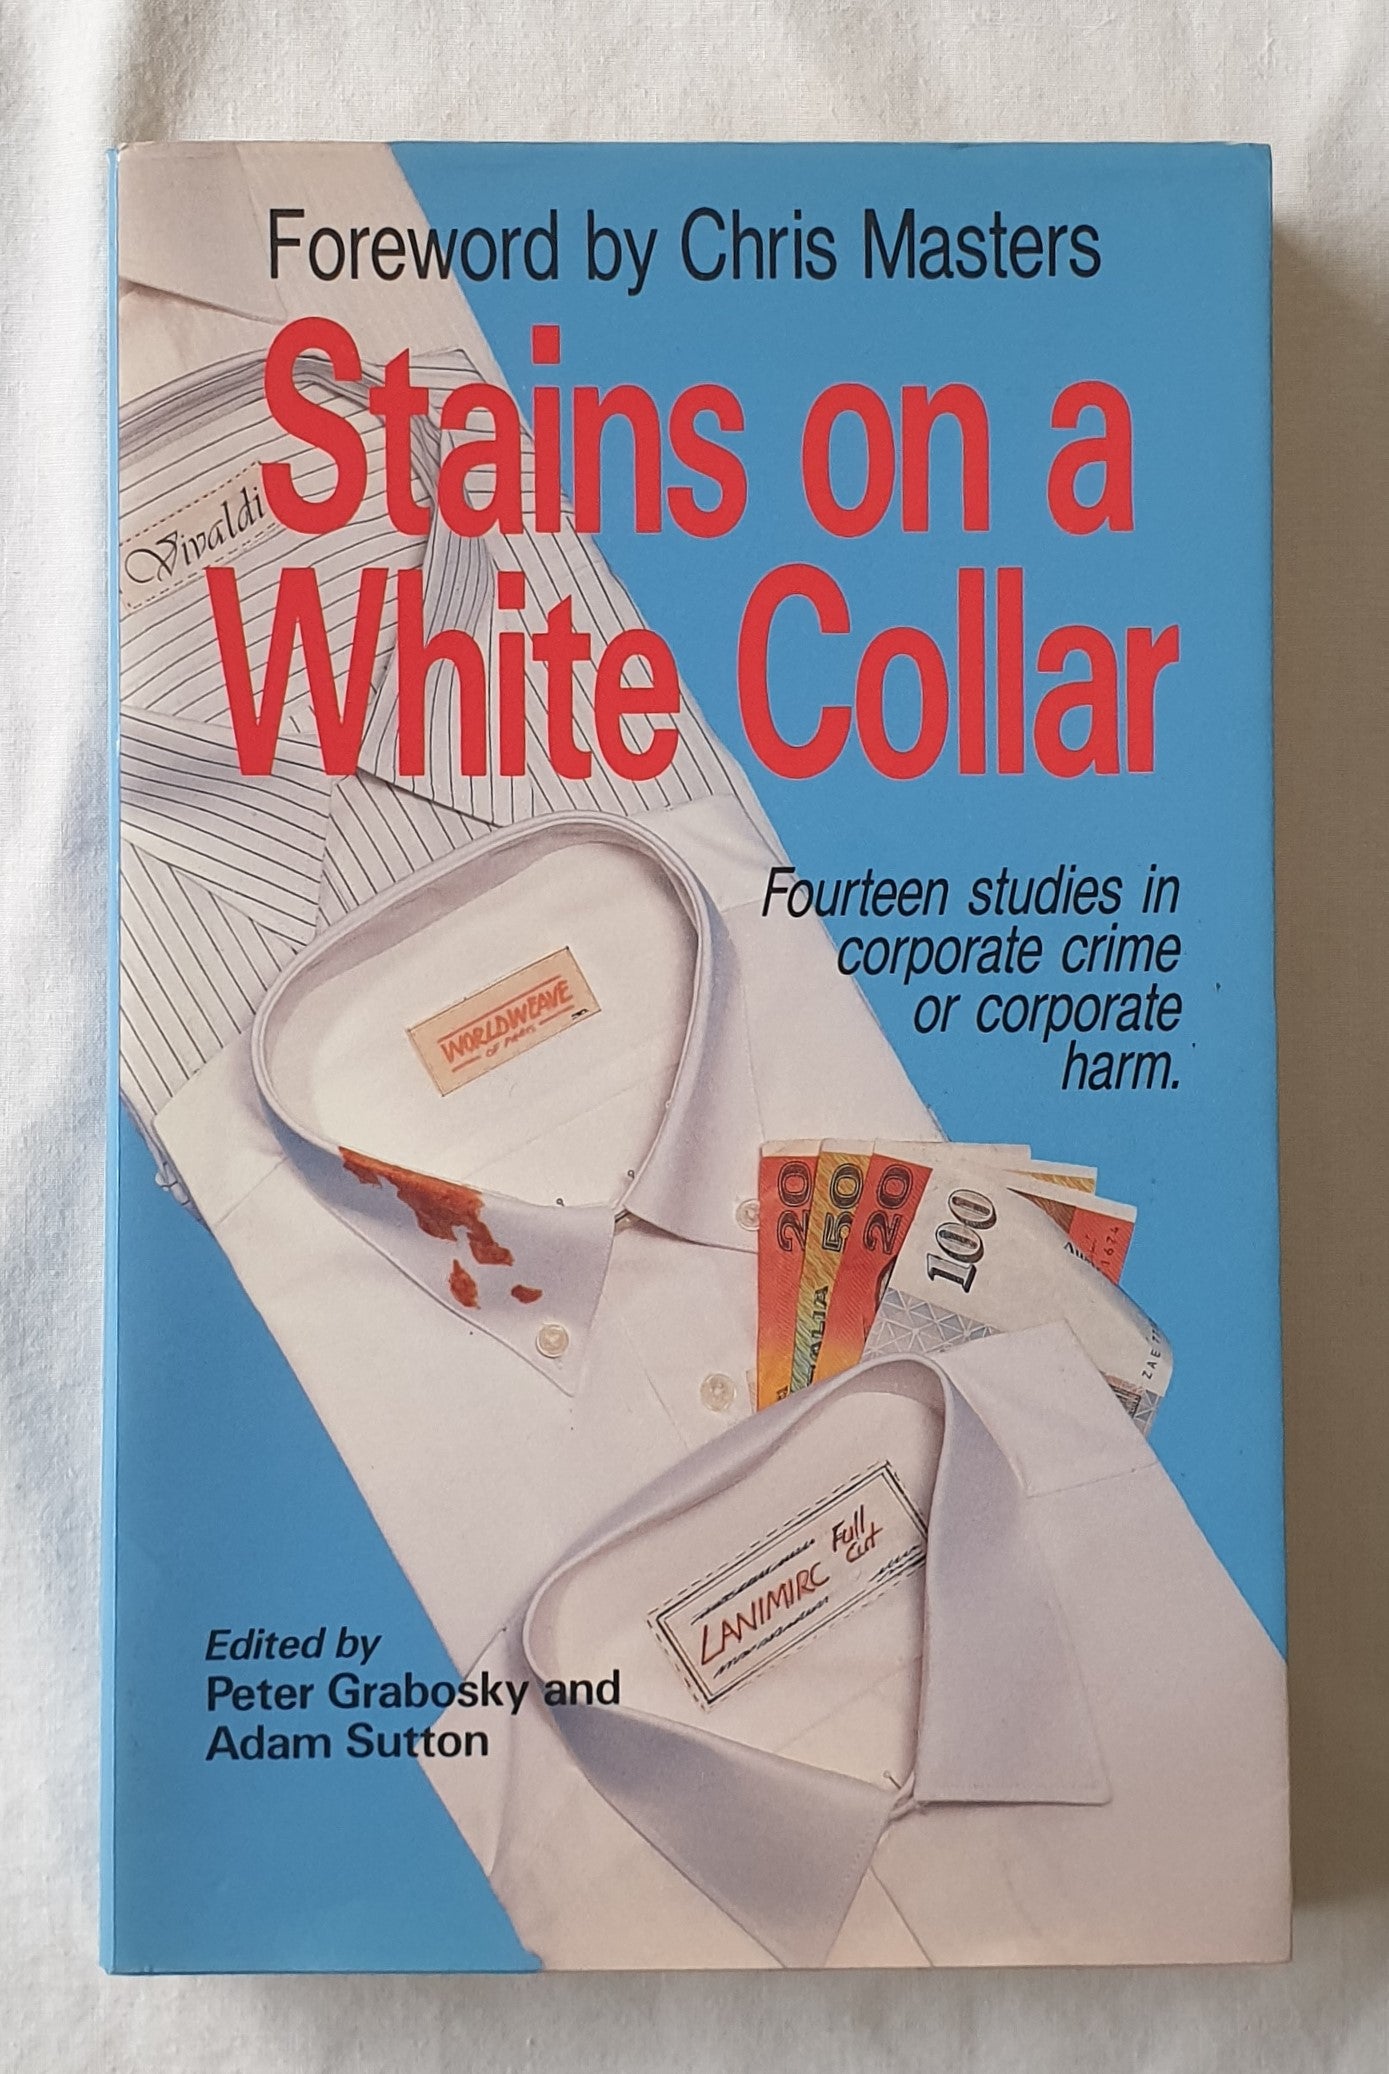 Stains on a White Collar by Peter Grabosky and Adam Sutton